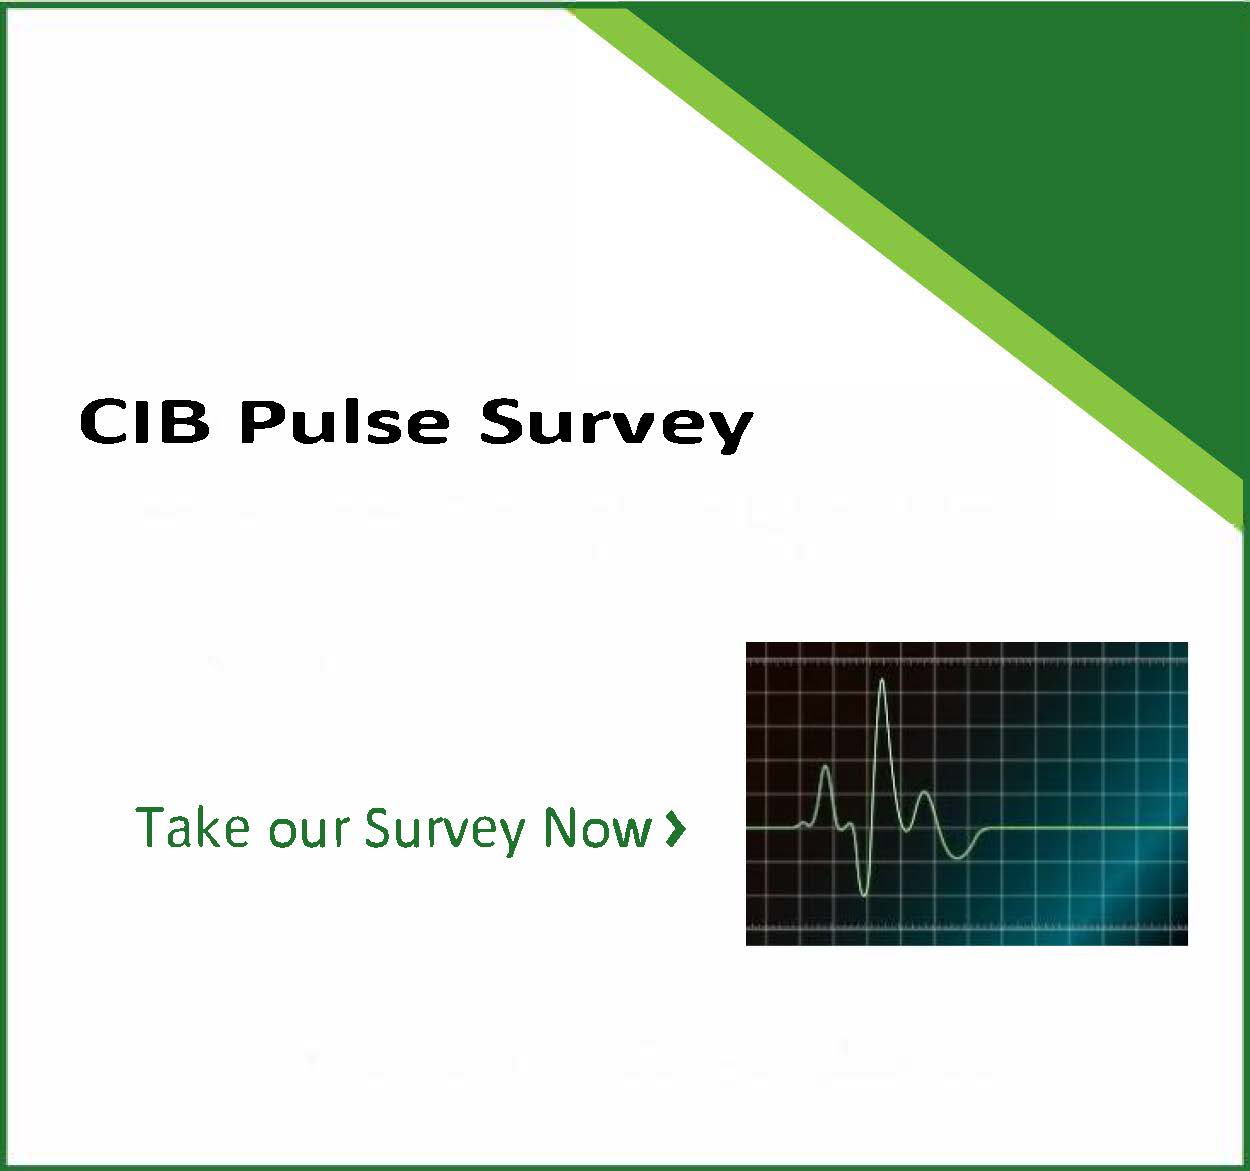 CIB Pulse: Impacts of the Pandemic on the Construction and Built Environment Sector